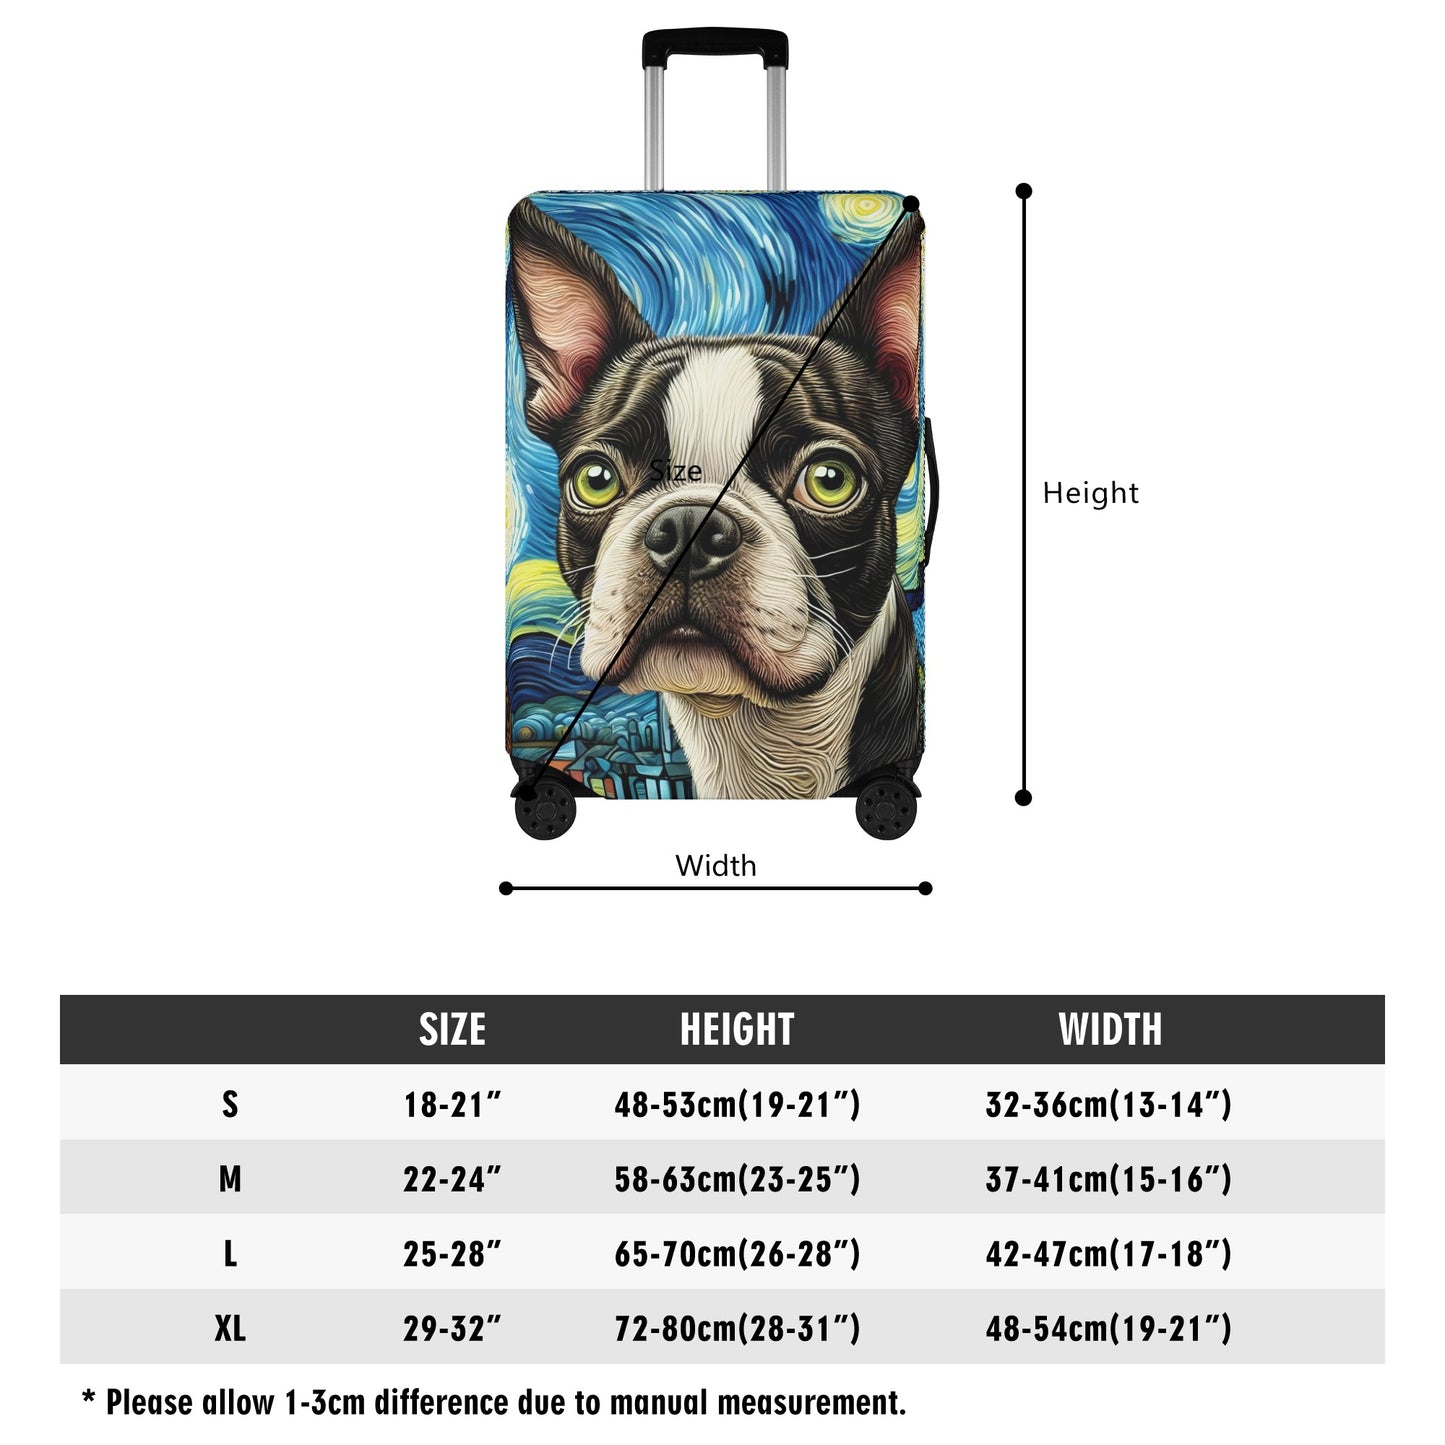 Joey - Luggage Cover for Boston Terrier lovers